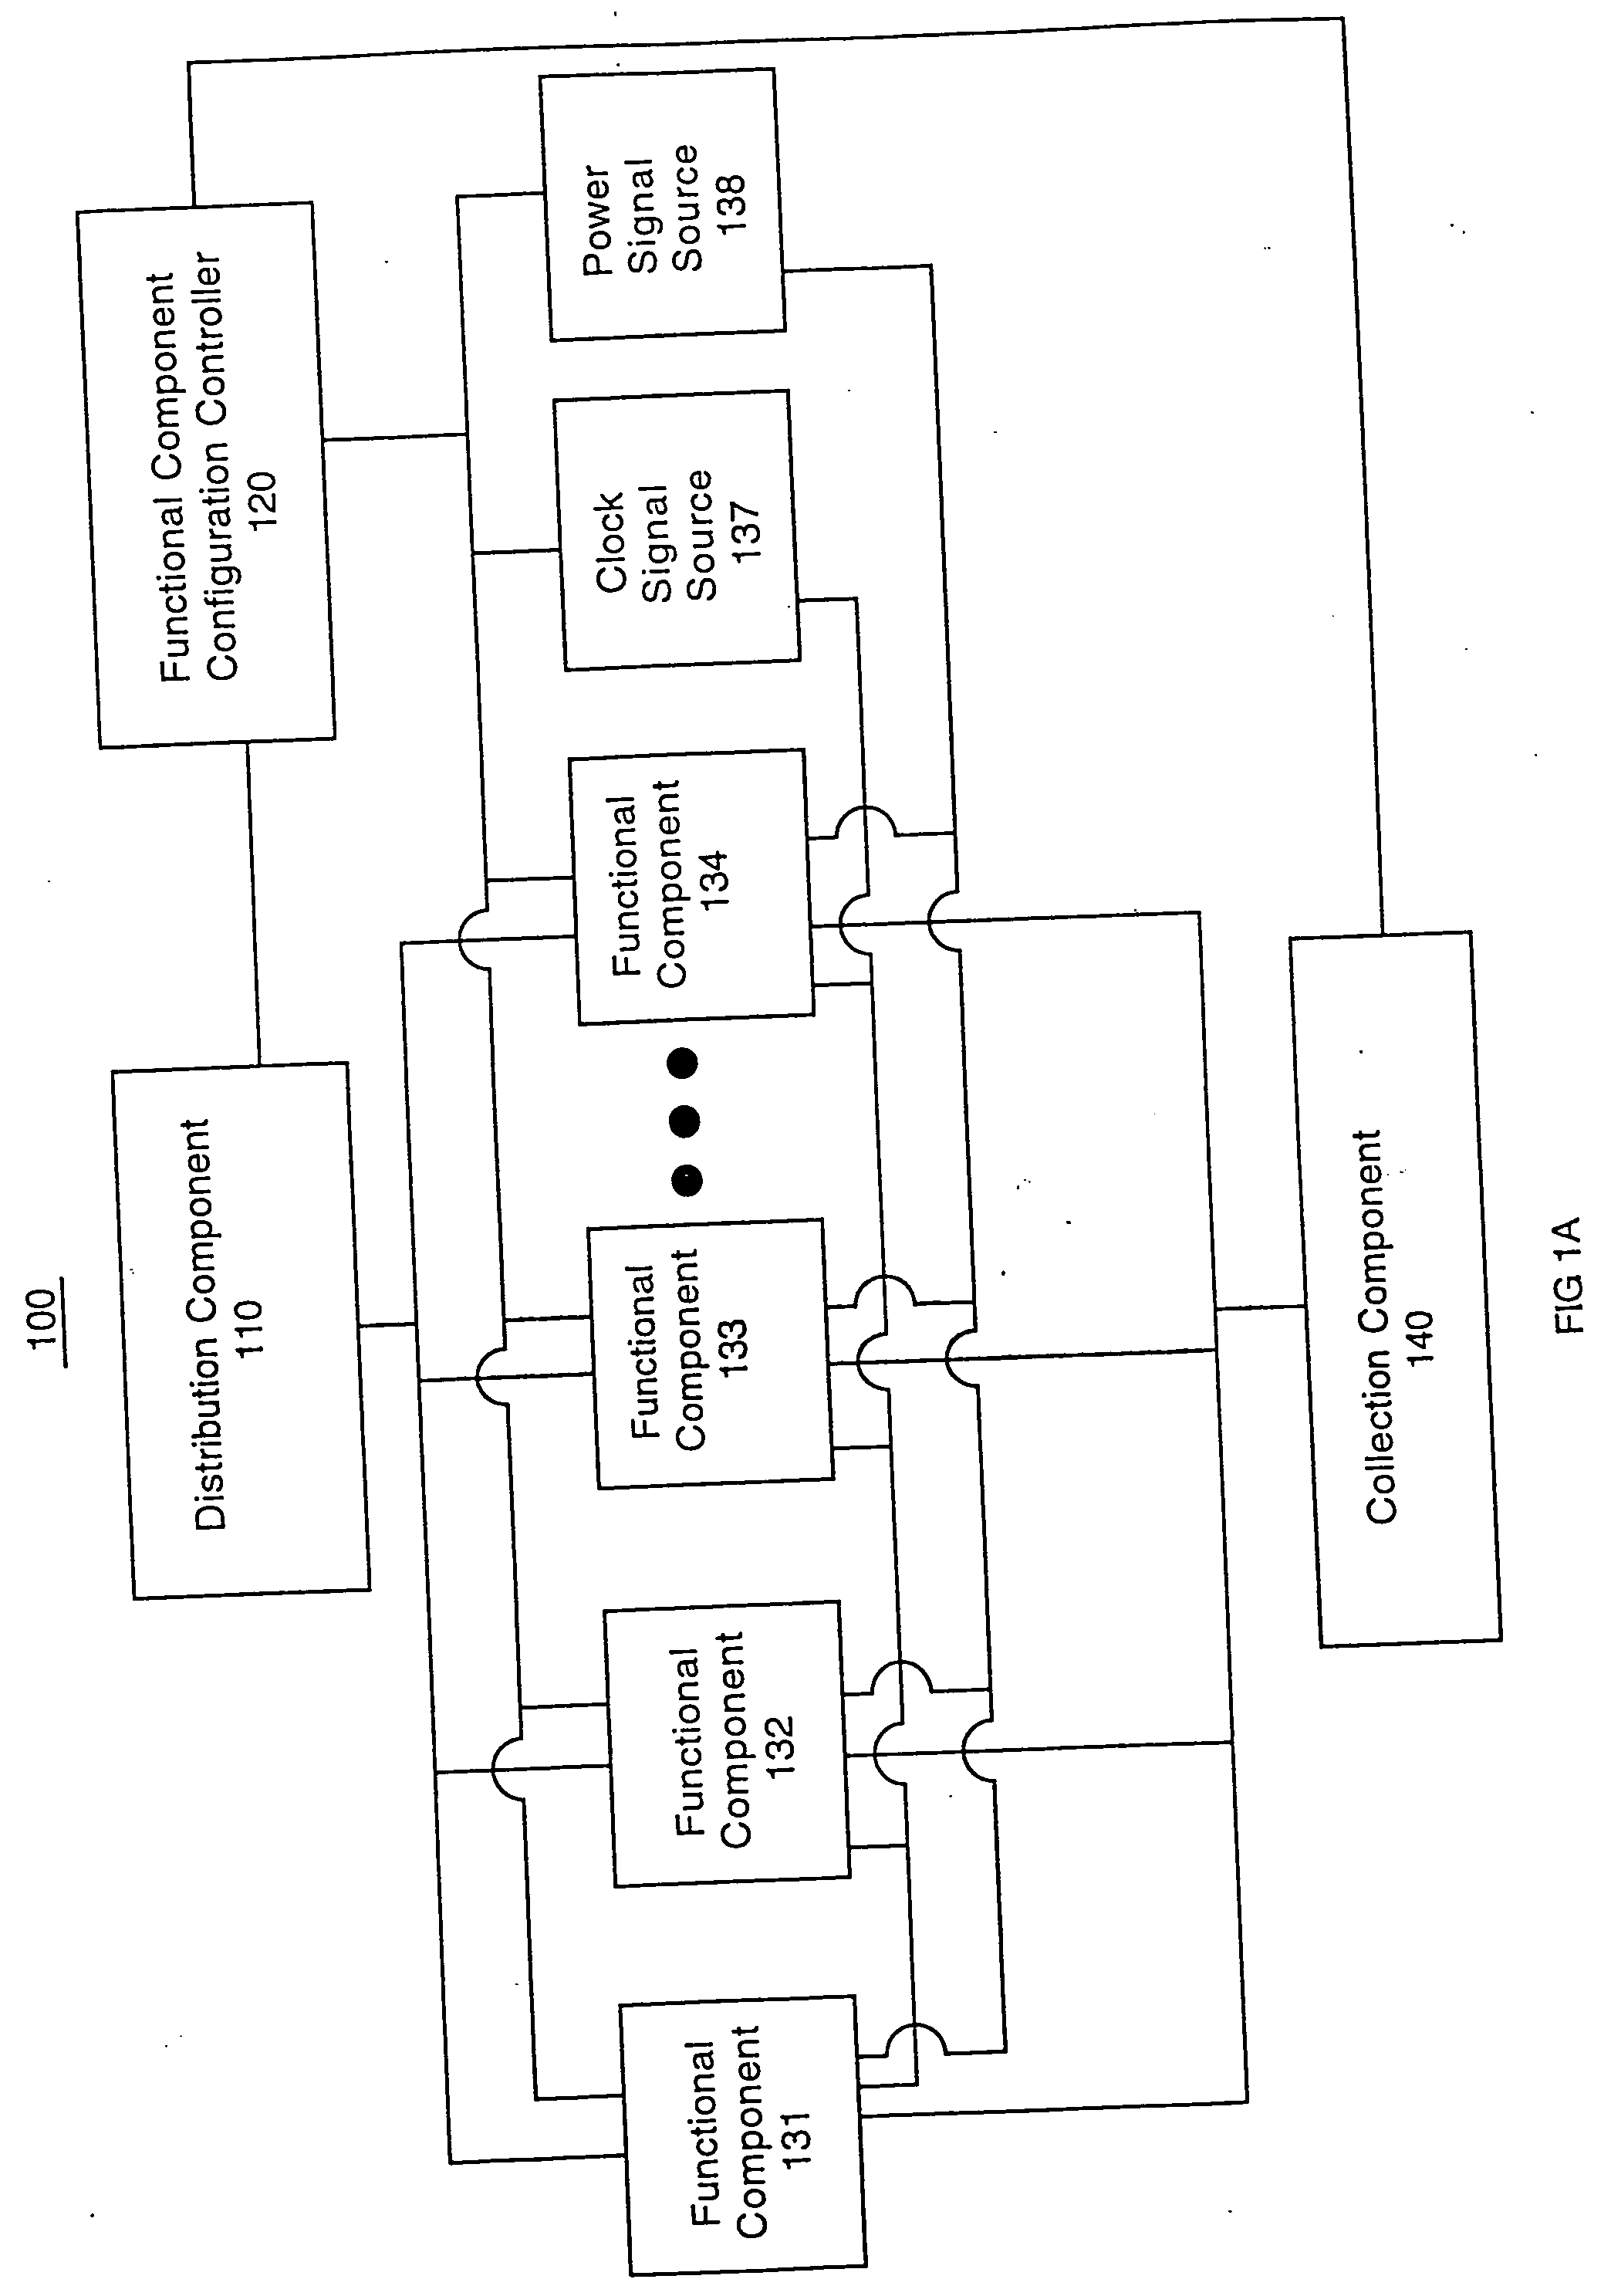 Integrated circuit configuration system and method